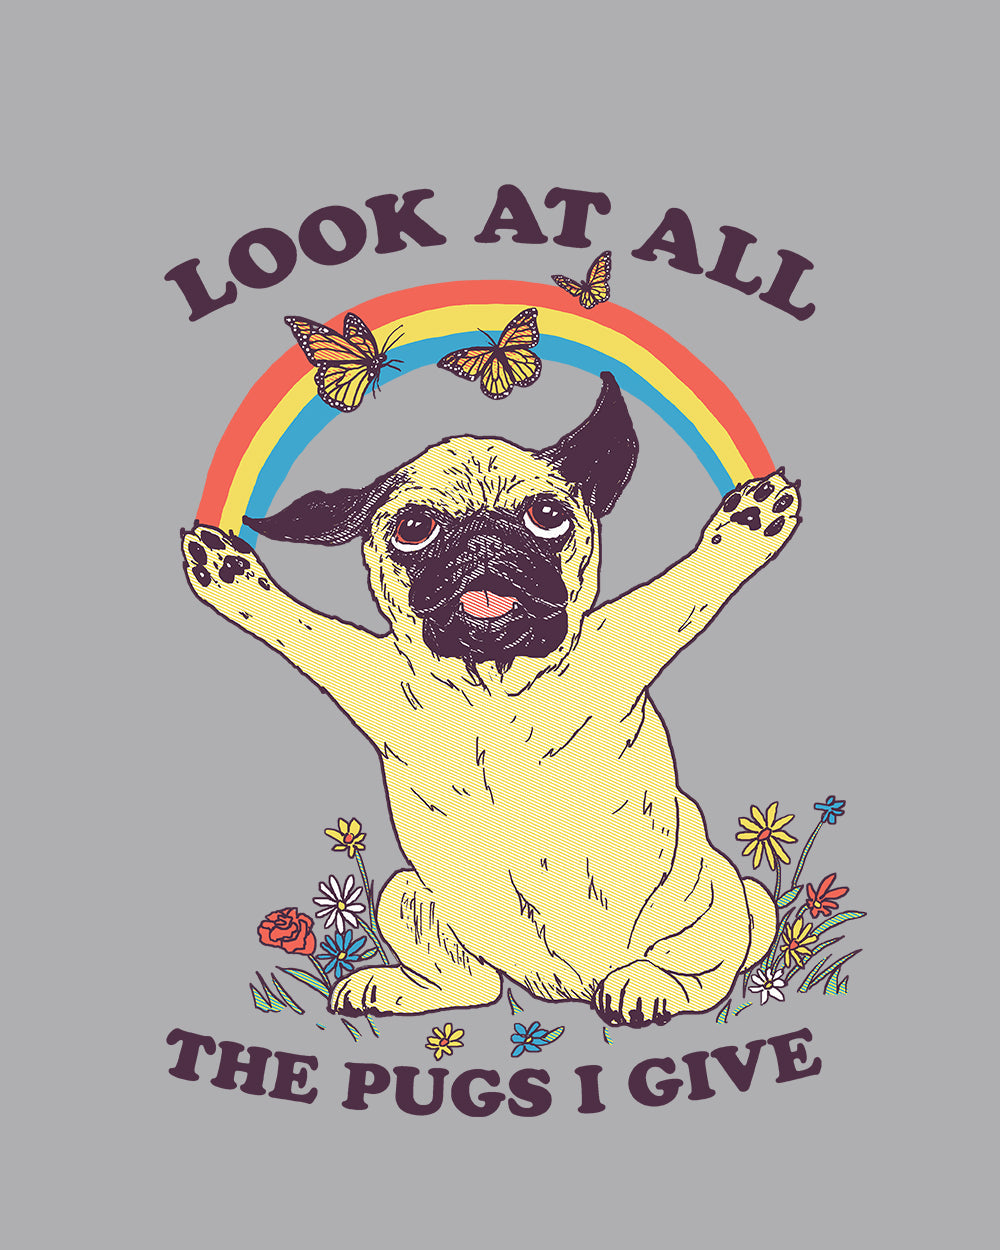 All the Pugs I Give T-Shirt Australia Online #colour_grey